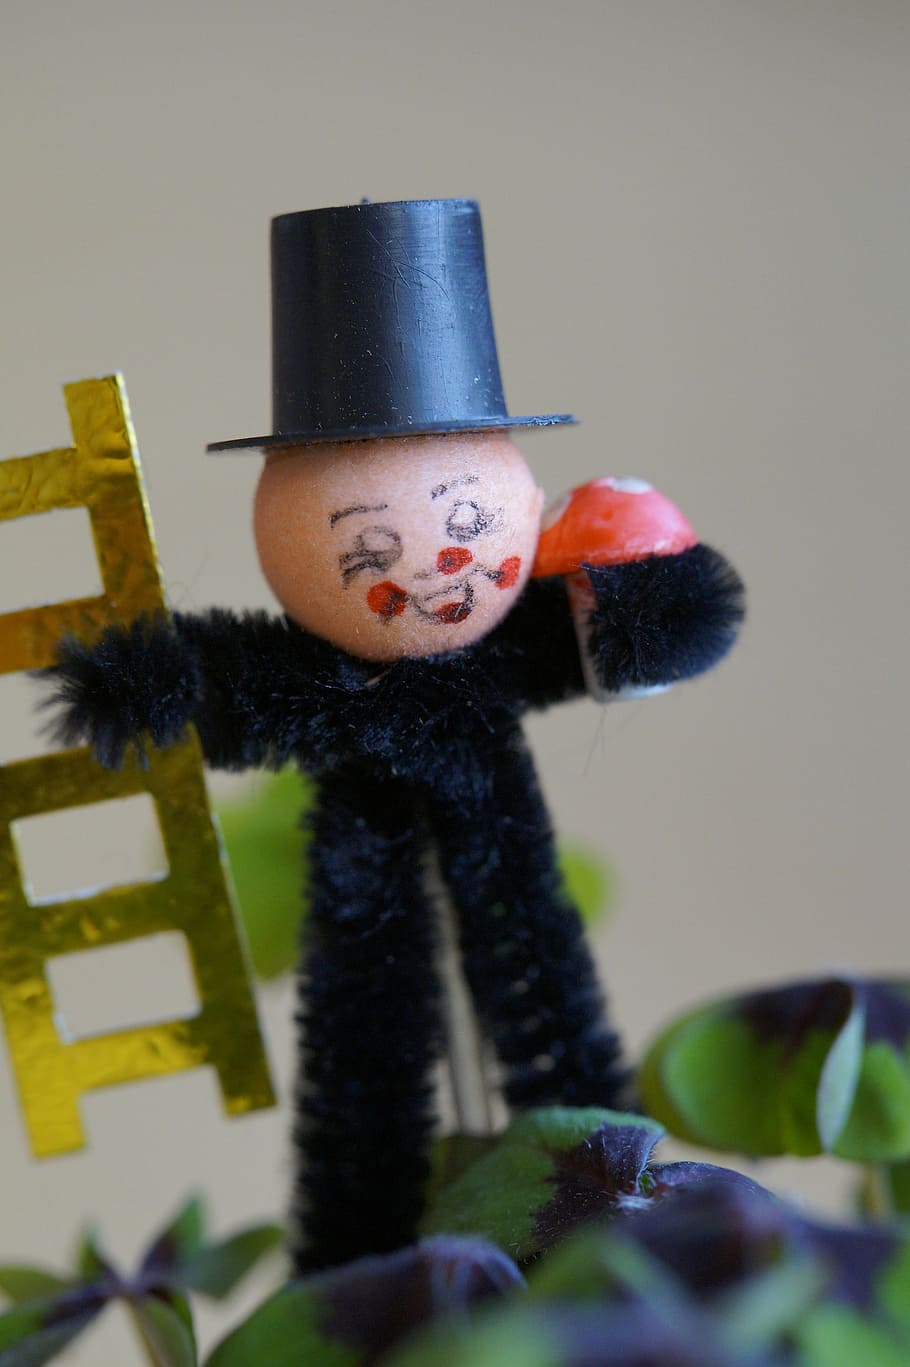 new year's eve, new year's day, lucky charm, chimney sweep